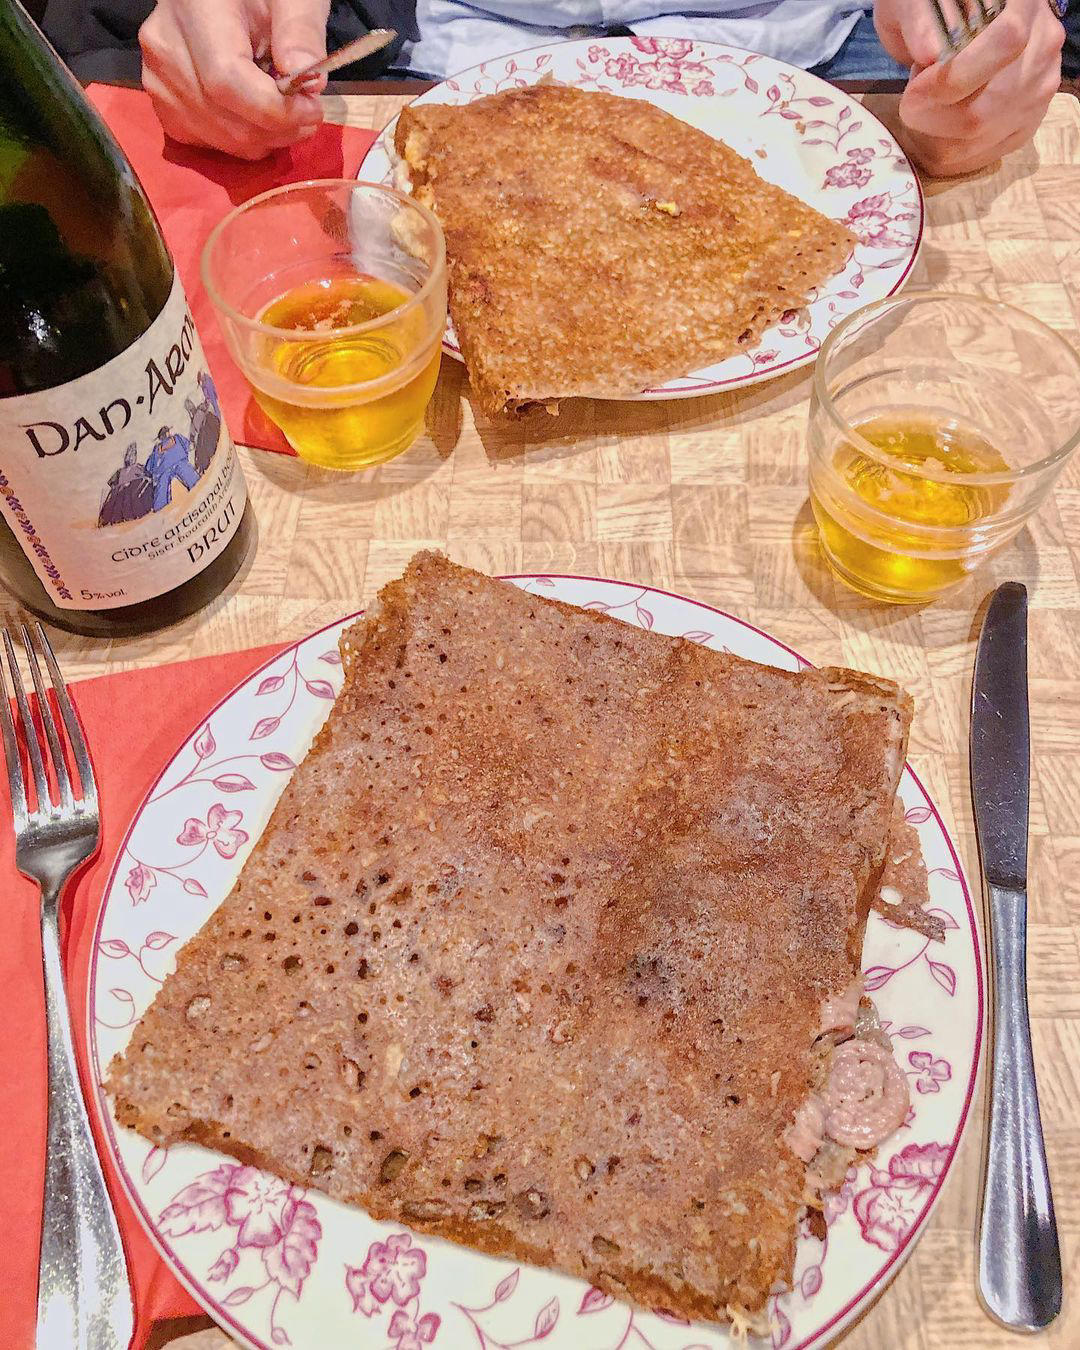 Trying out one of the most famous crêperie restaurant in Paris